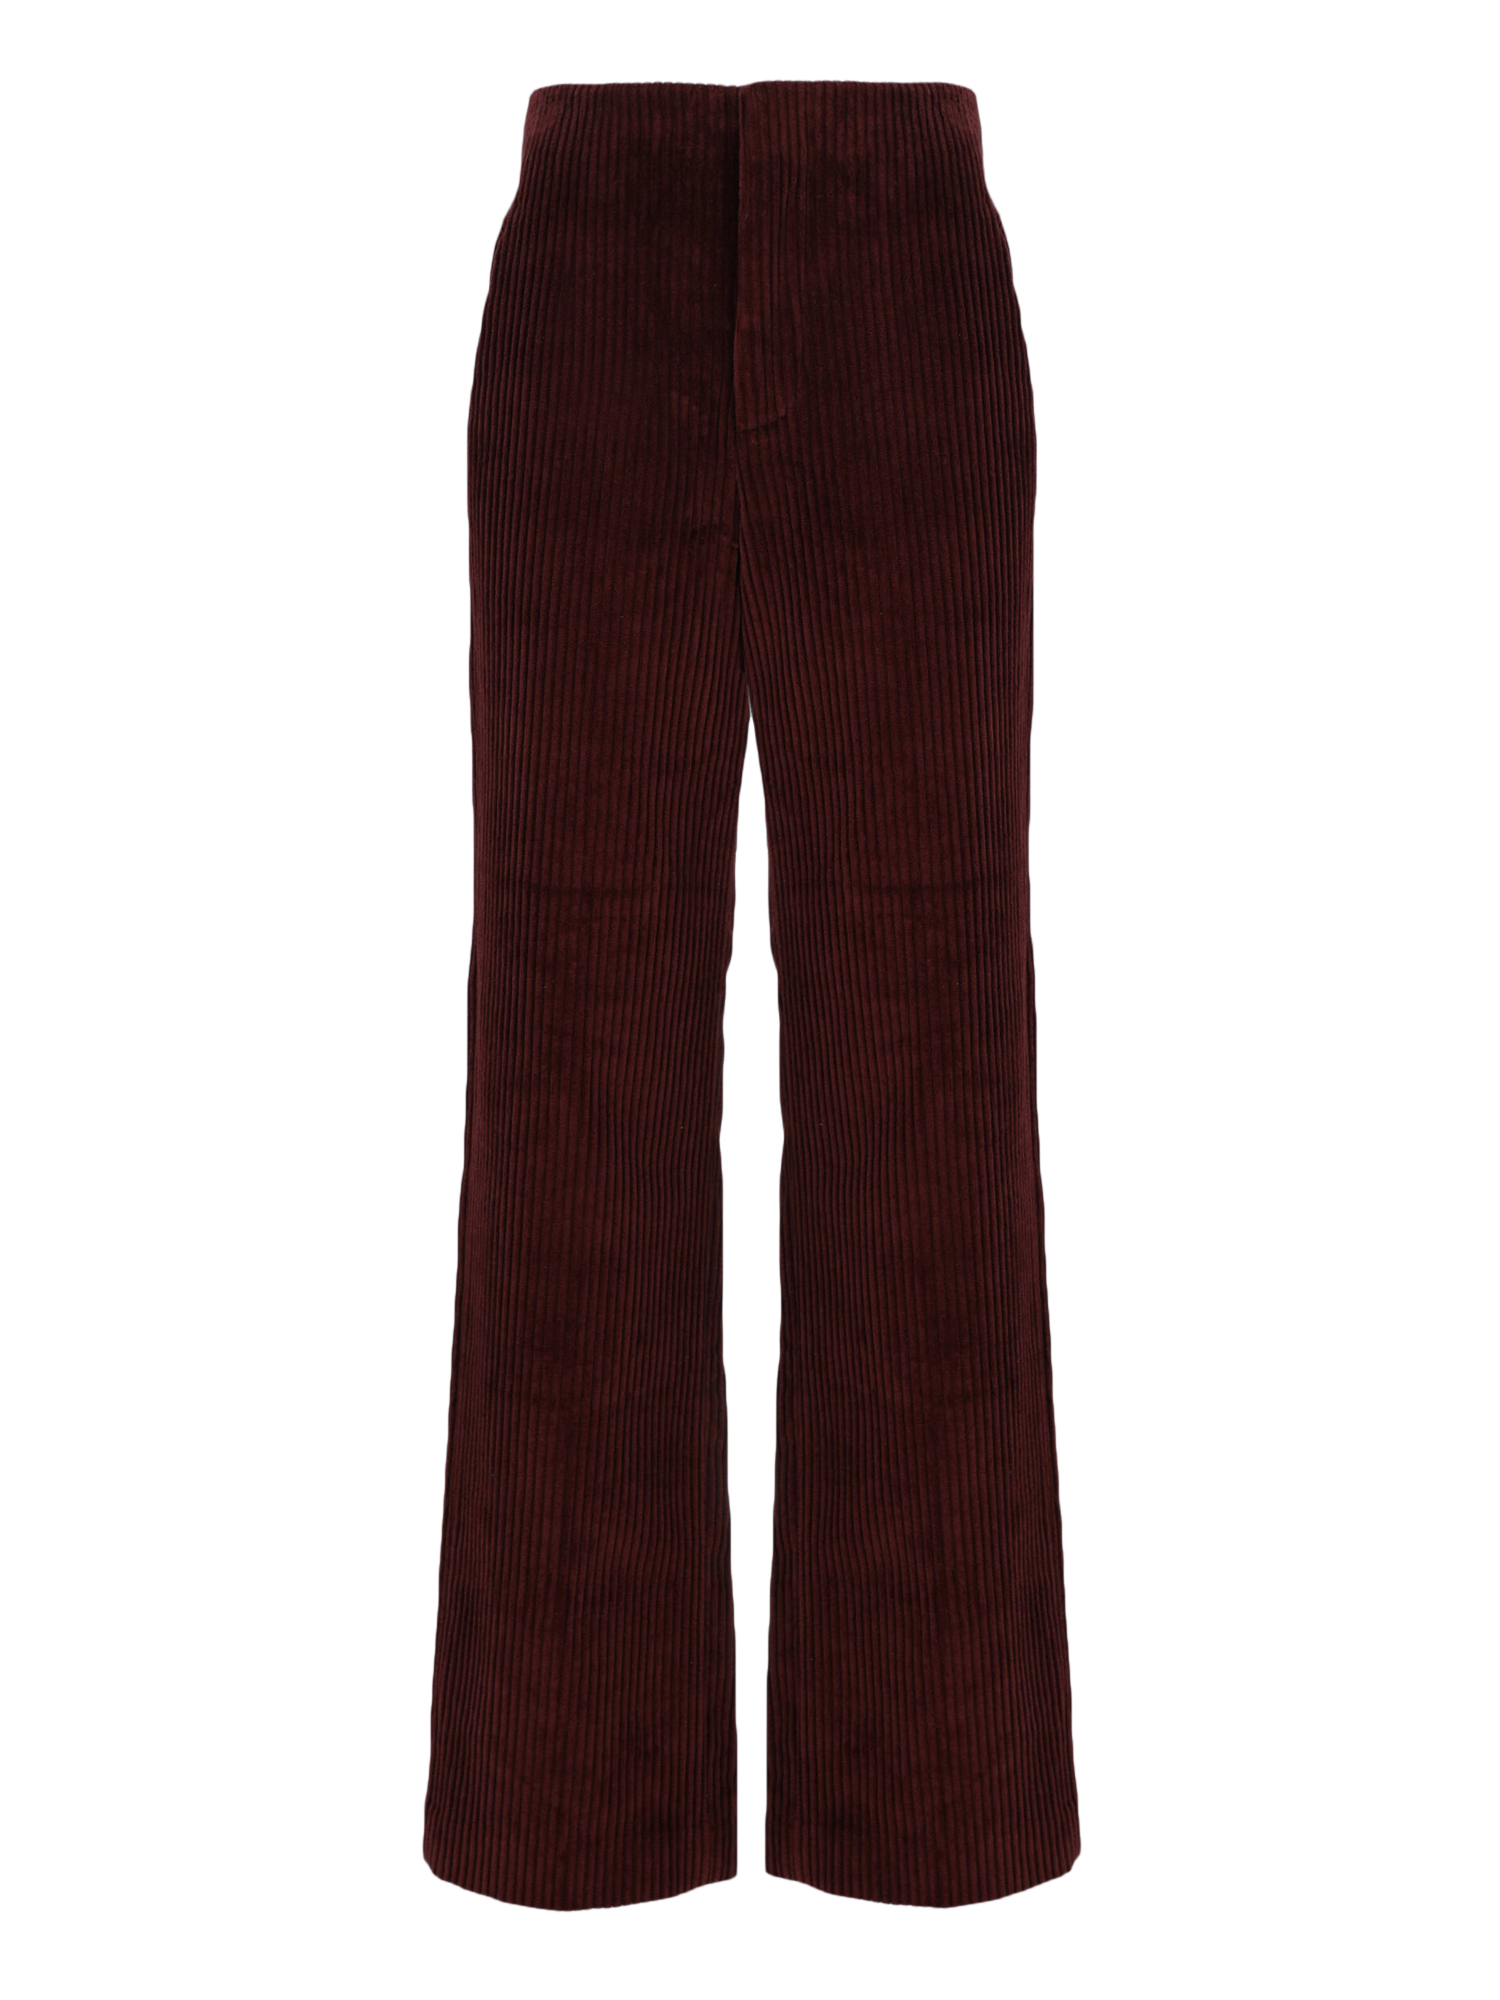 Pre-owned Brunello Cucinelli Women's Trousers -  - In Burgundy M